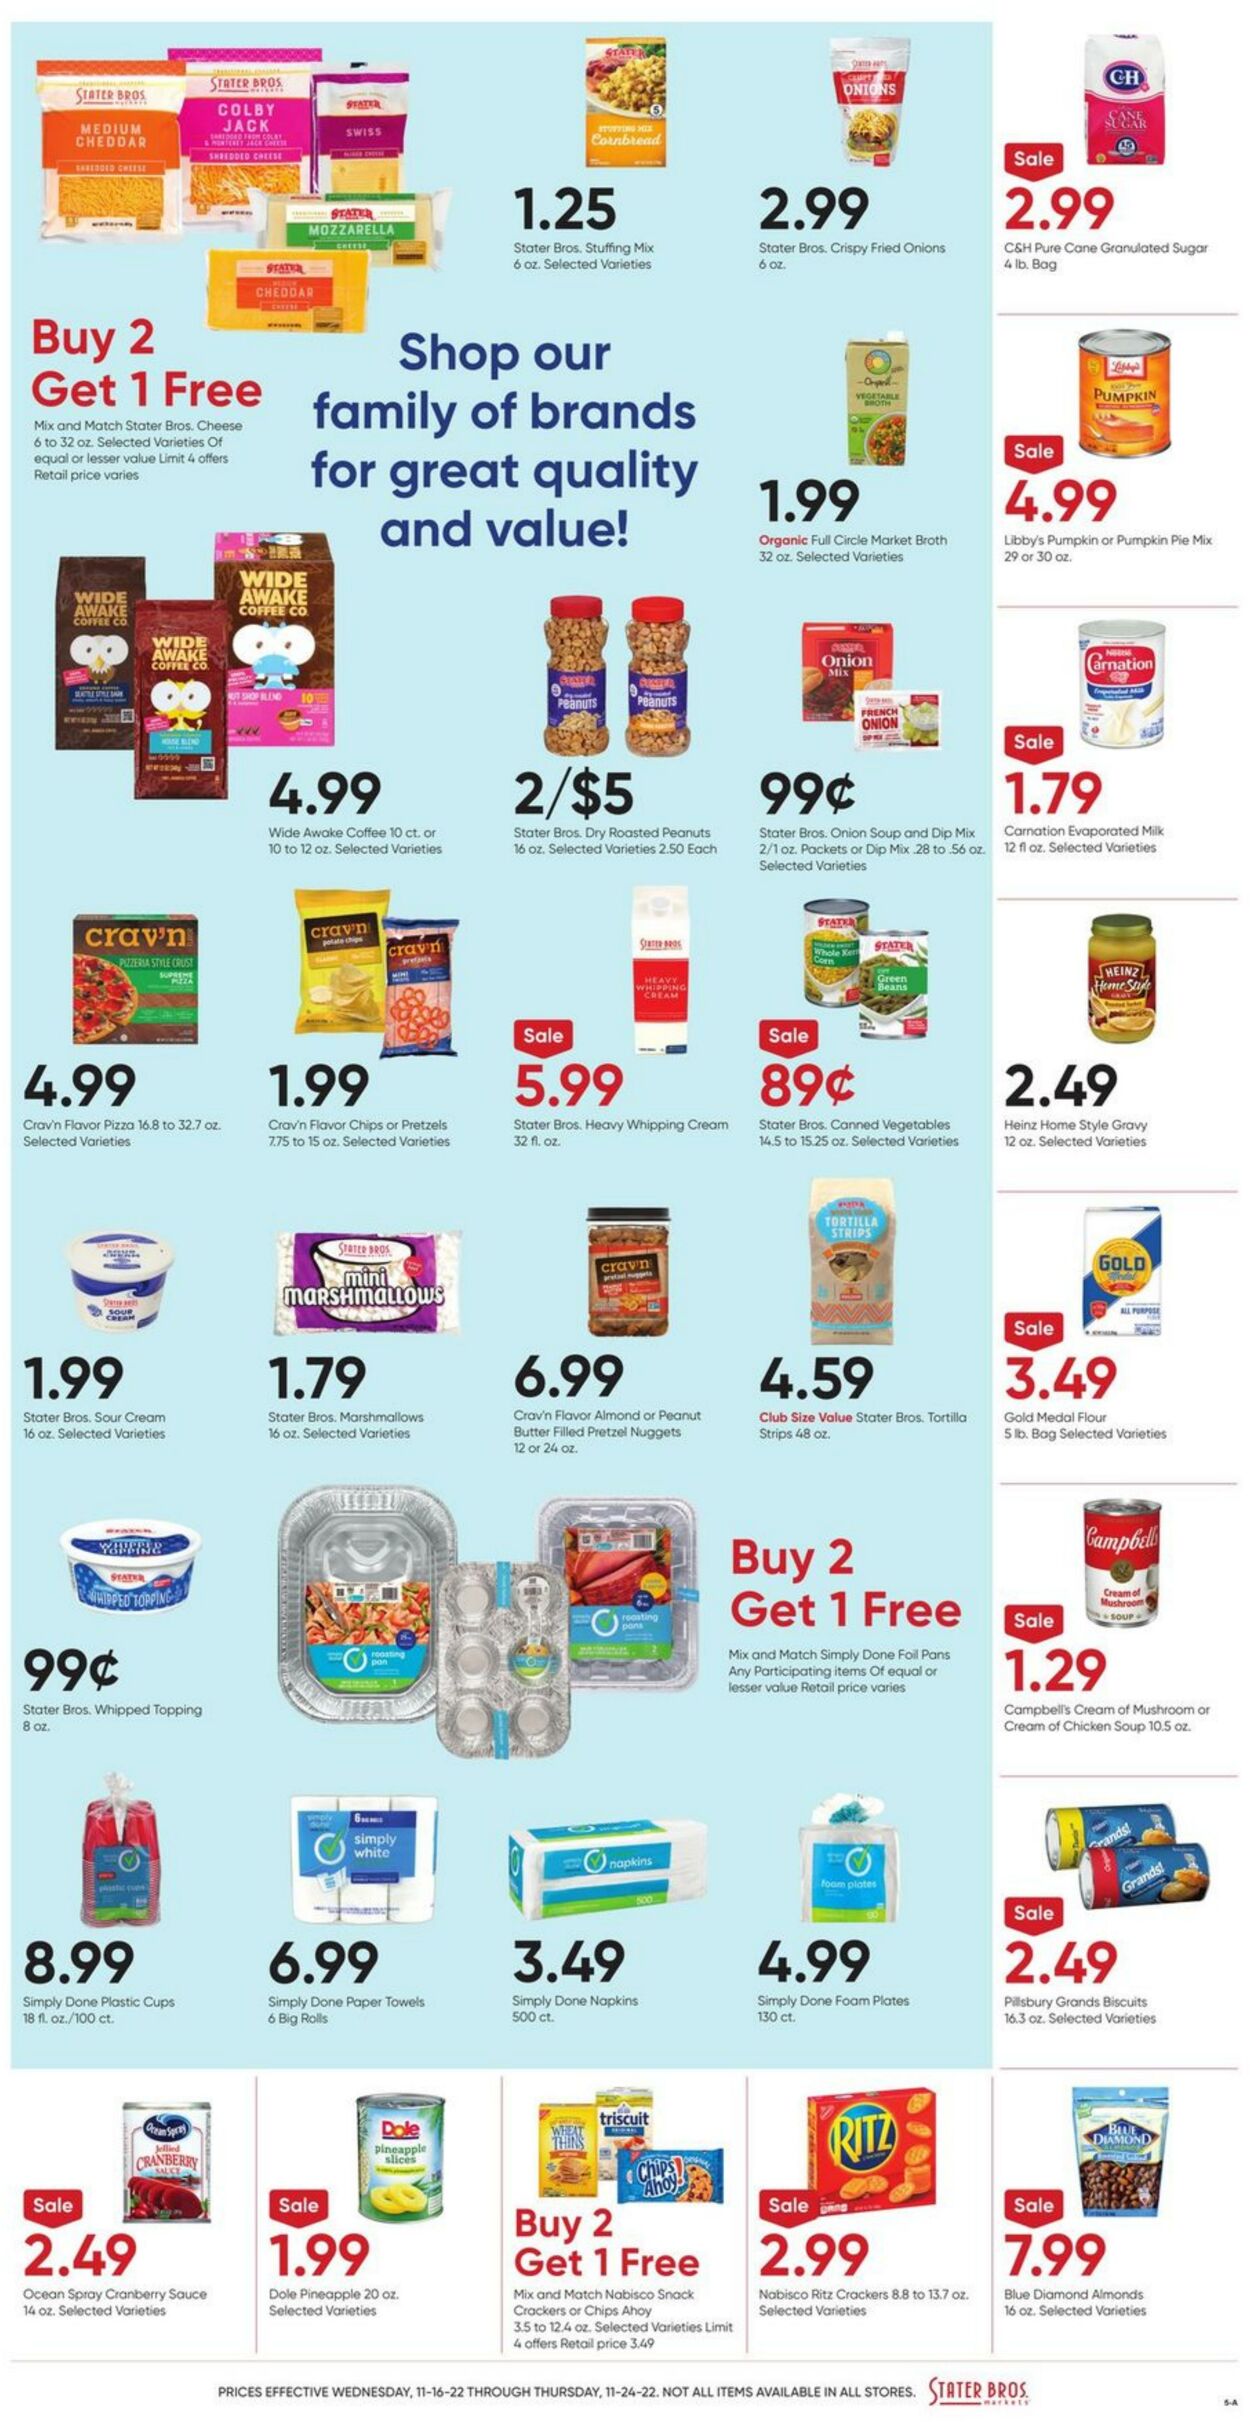 Weekly ad Stater Bros 11/16/2022 - 11/24/2022